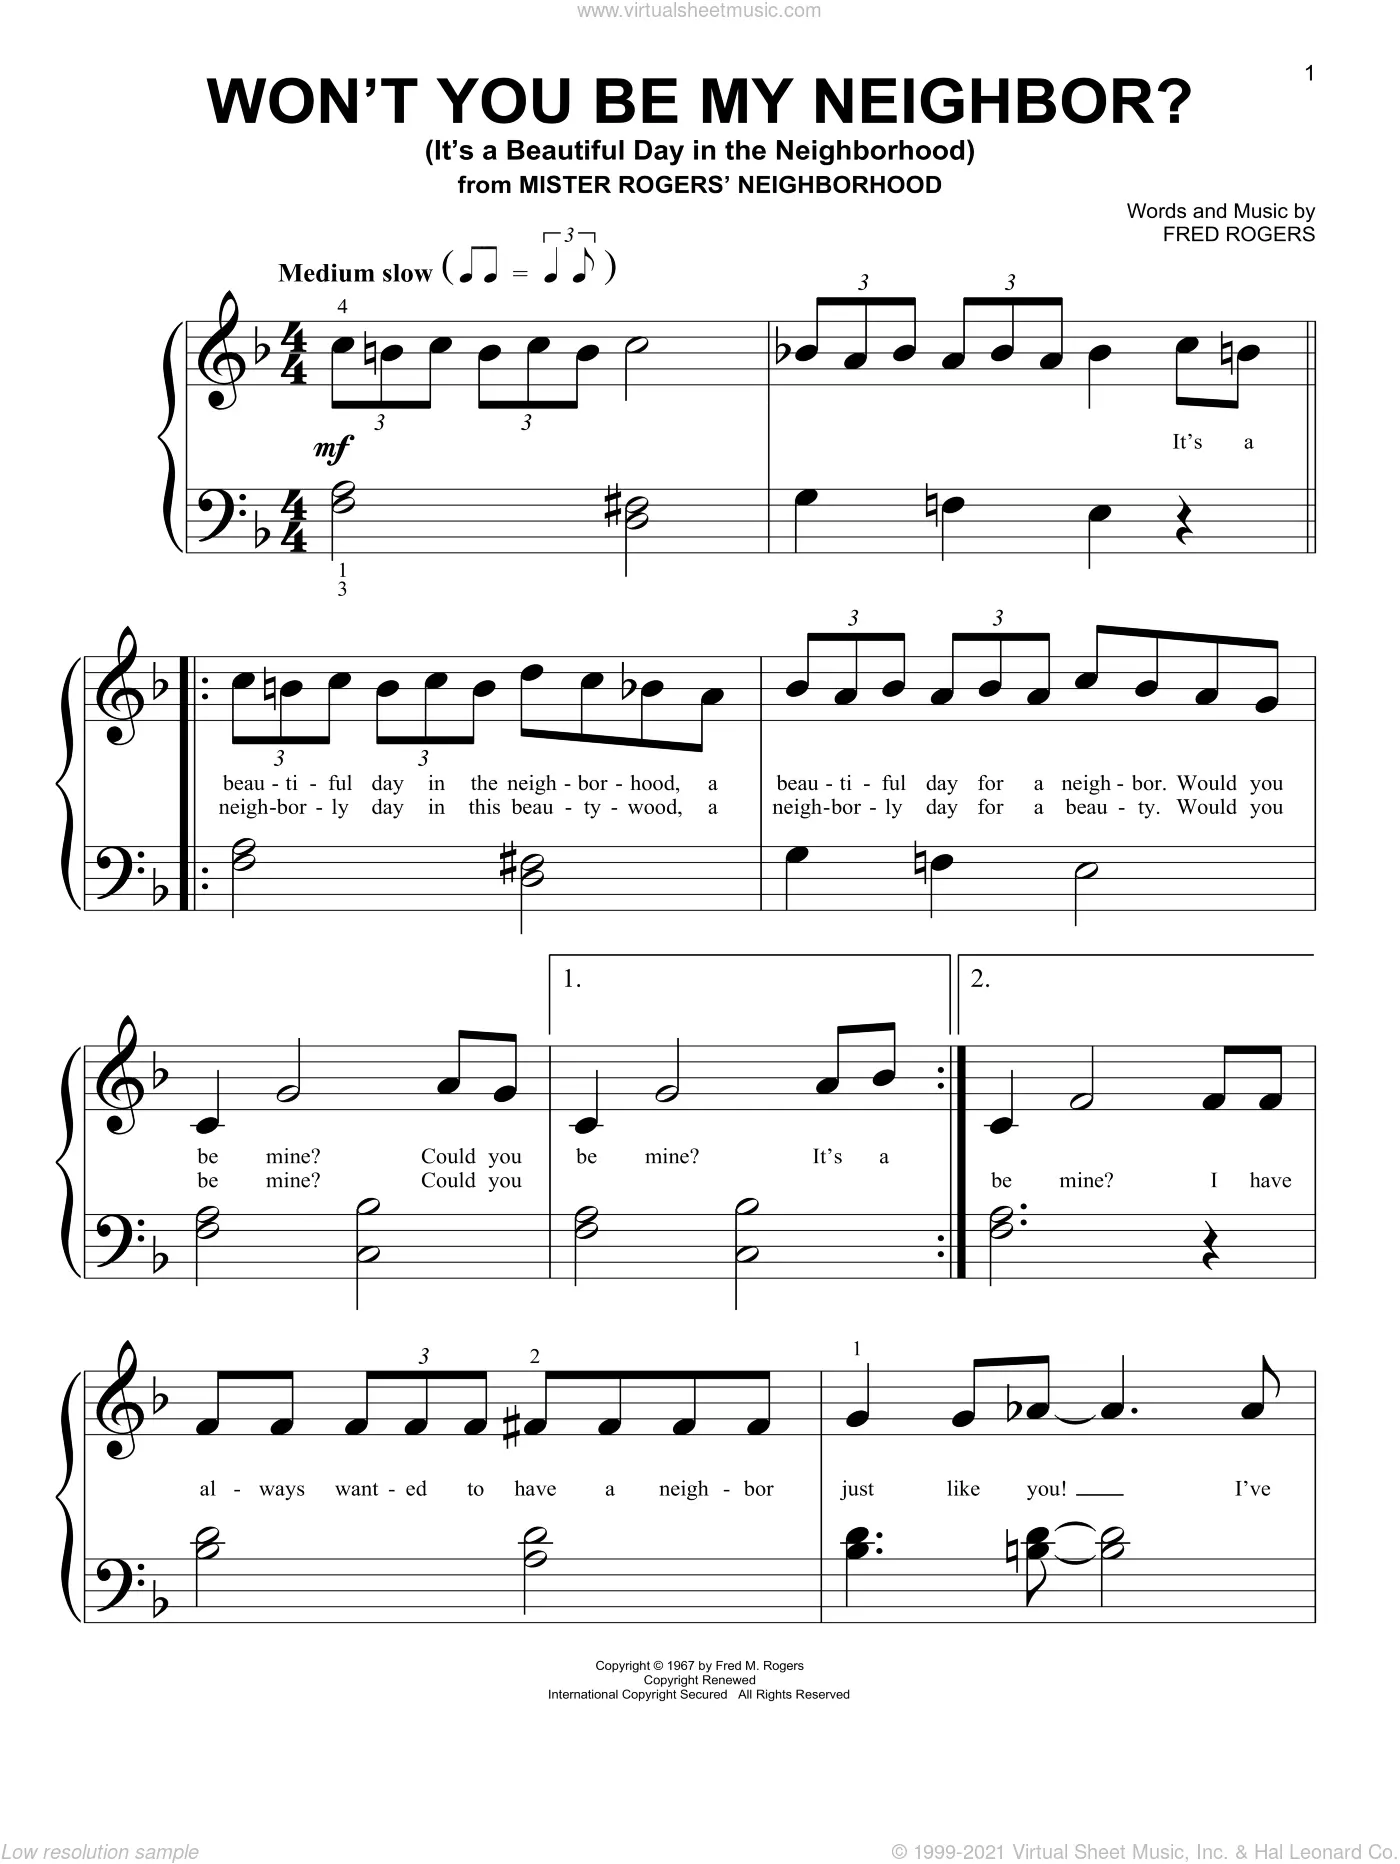 Earned It Sheet music for Piano (Solo)